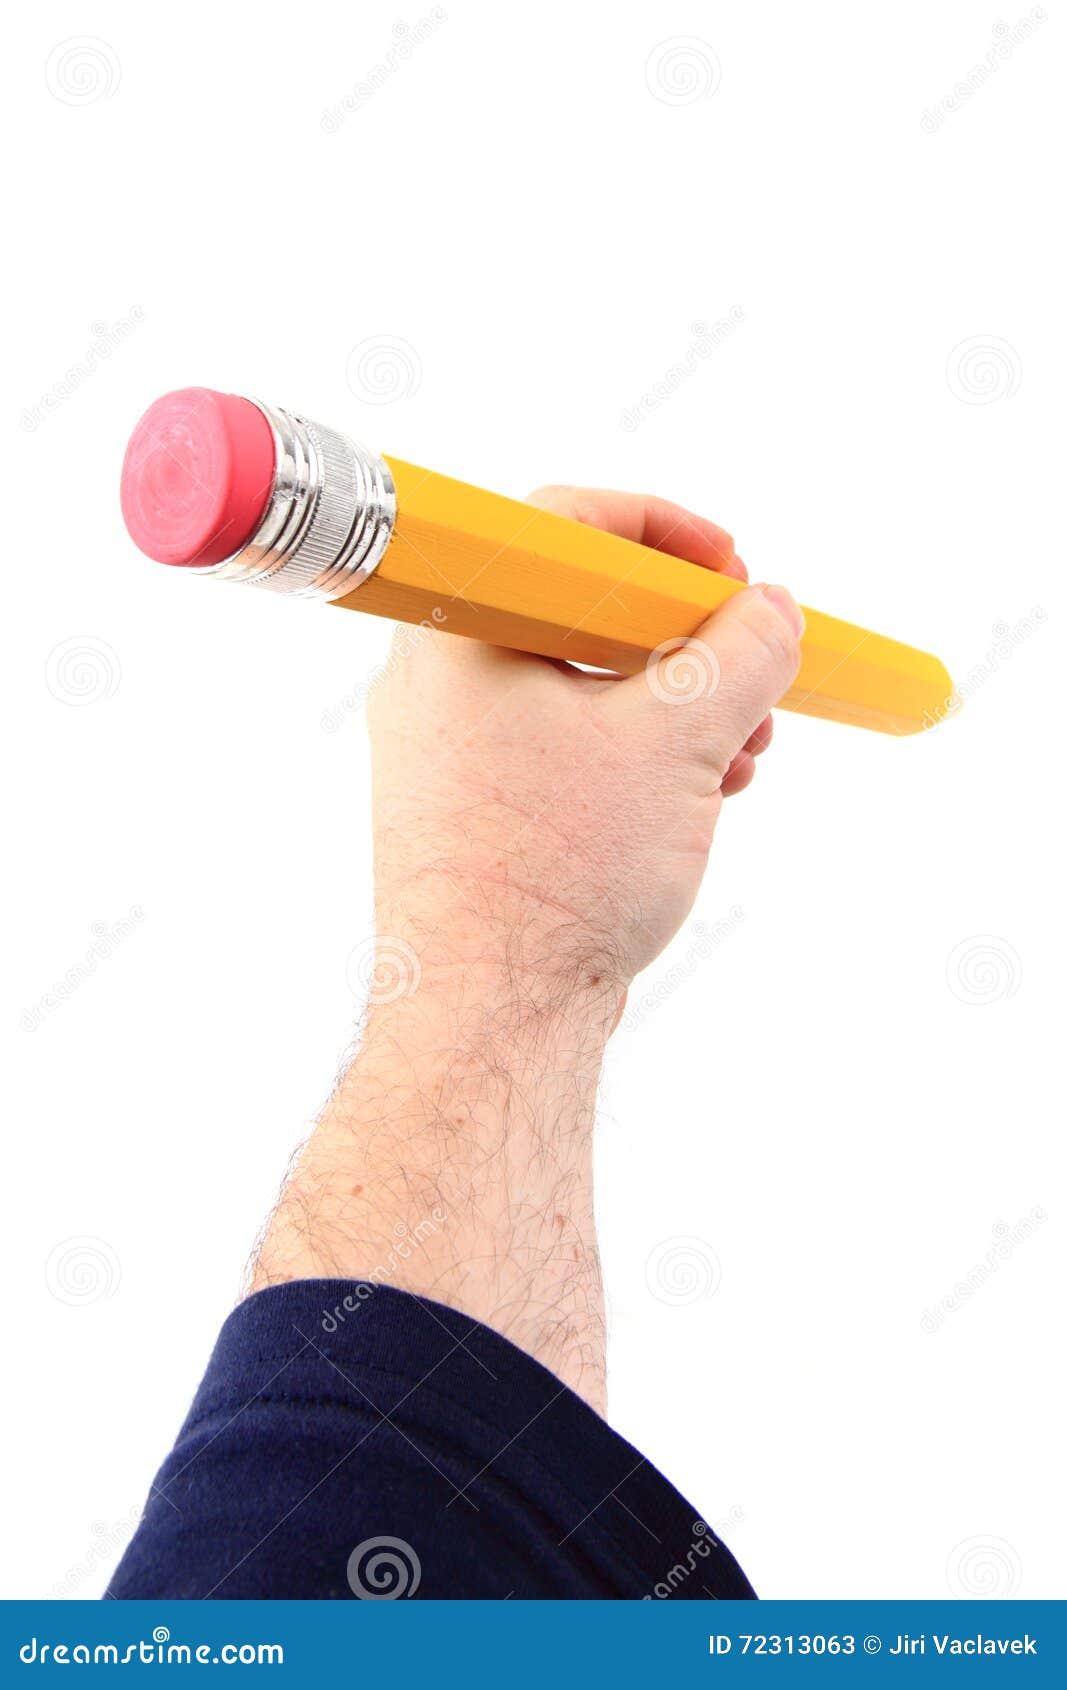 big-pencil-human-hand-isolated-white-background-72313063.jpg